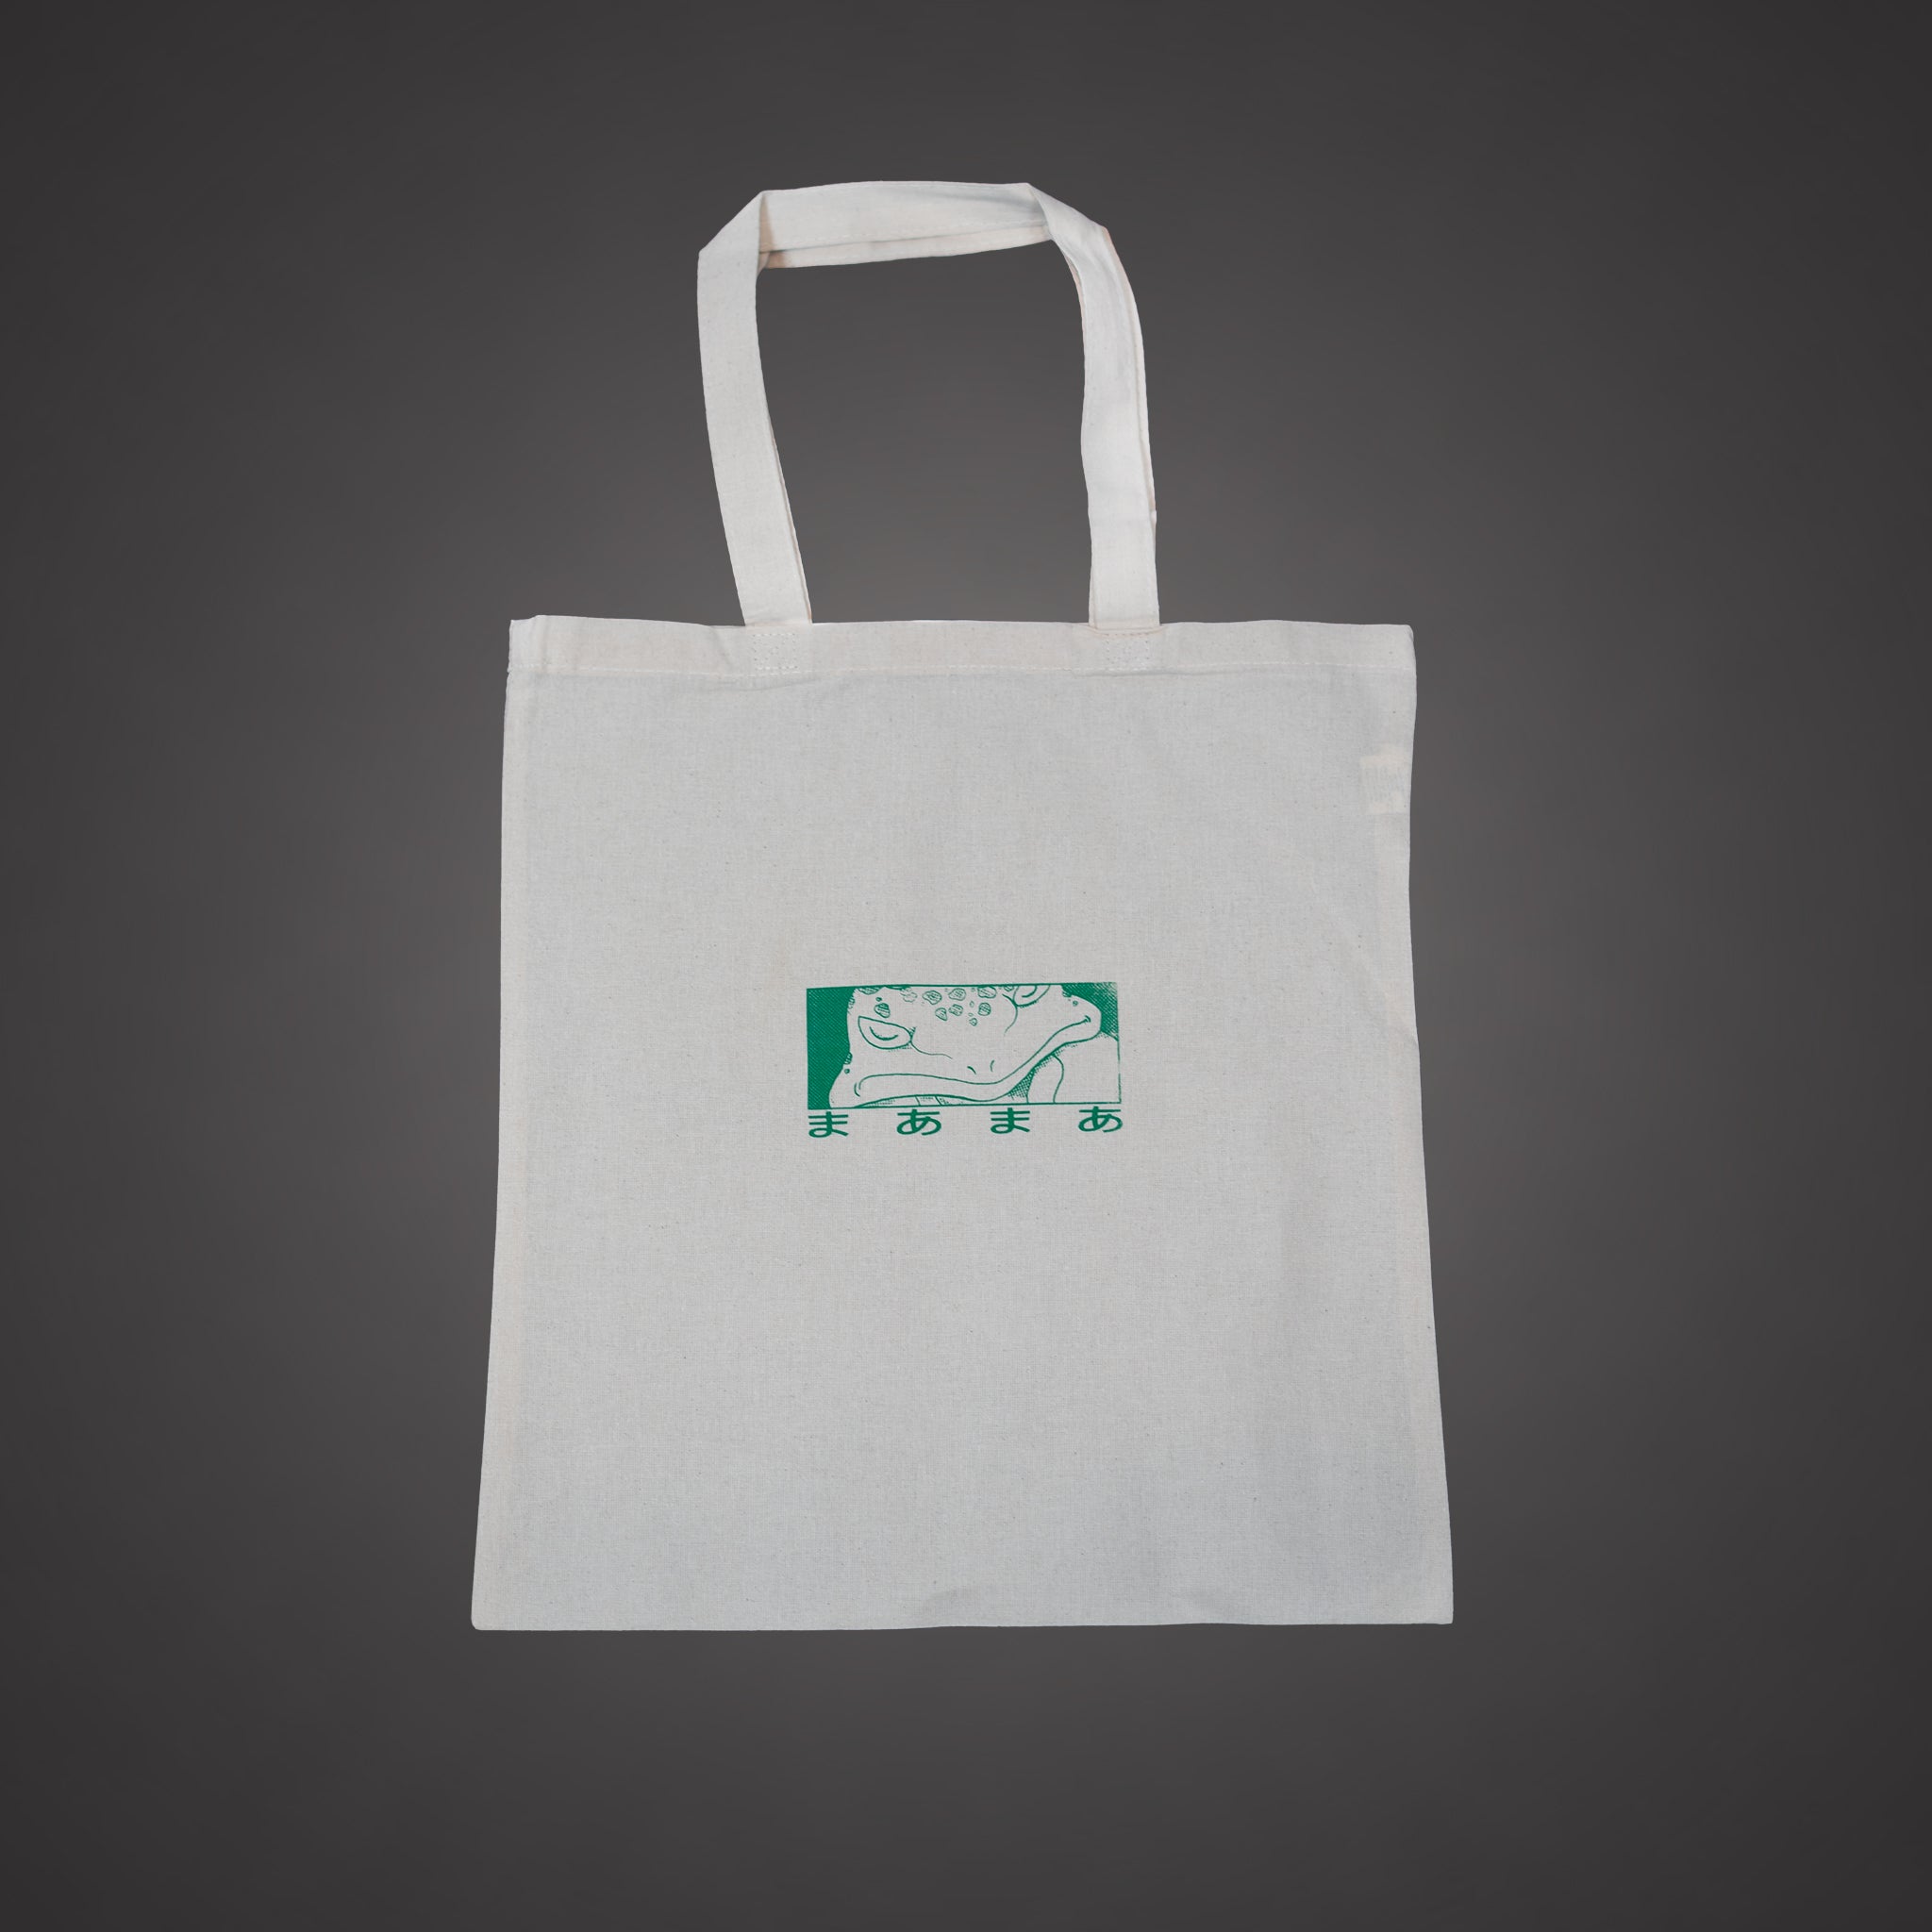 Tote bag with a green Toad design